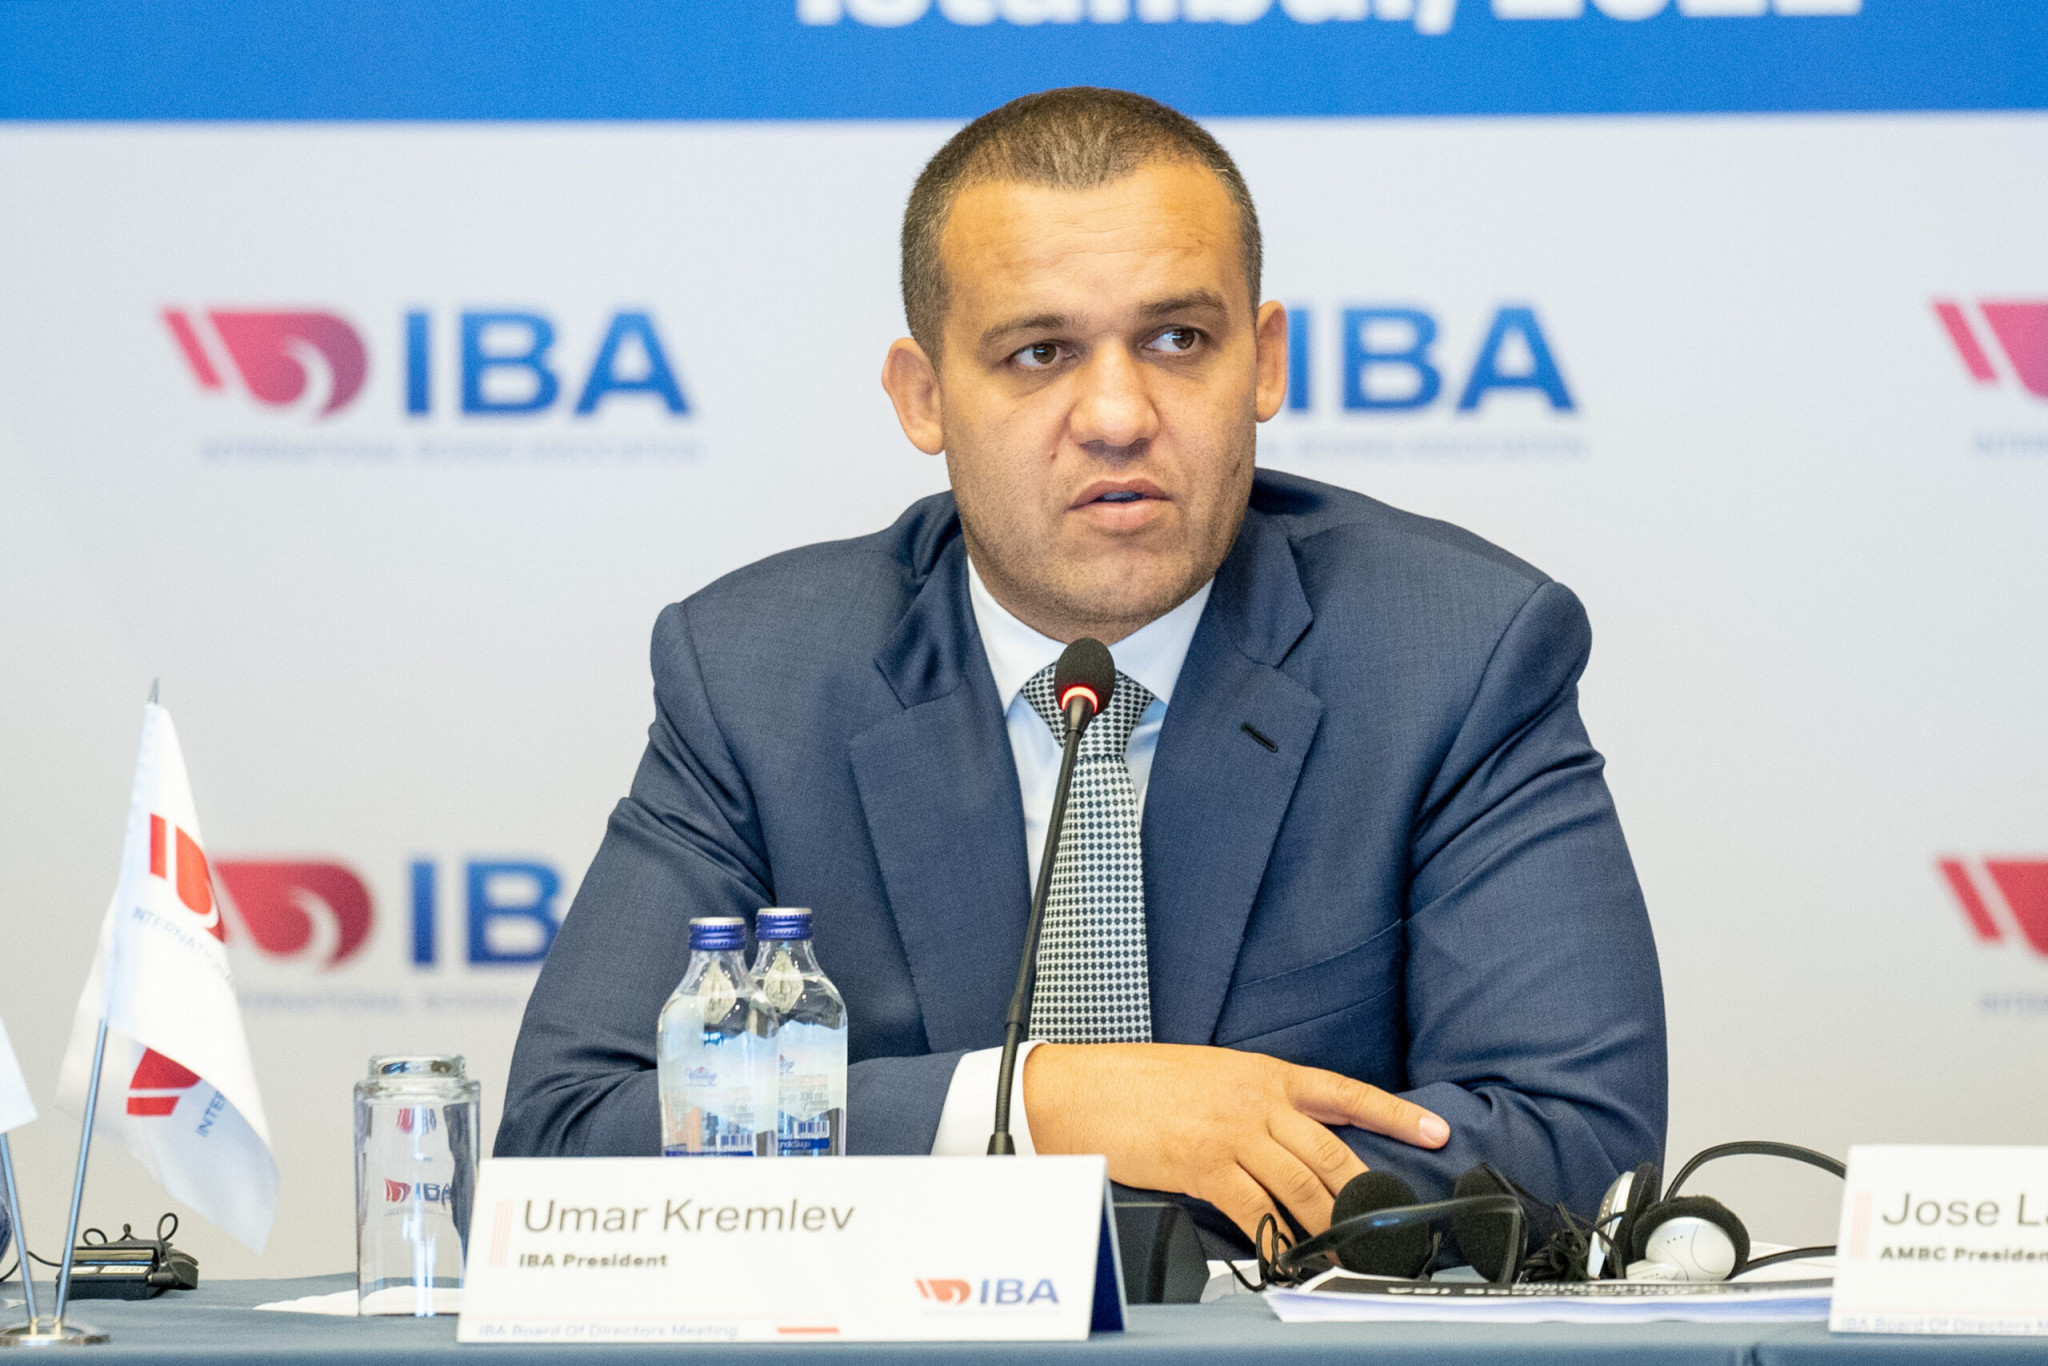 Russian official Umar Kremlev was elected by acclamation in May, but could be challenged by Boris van der Vorst in Yerevan this weekend ©IBA